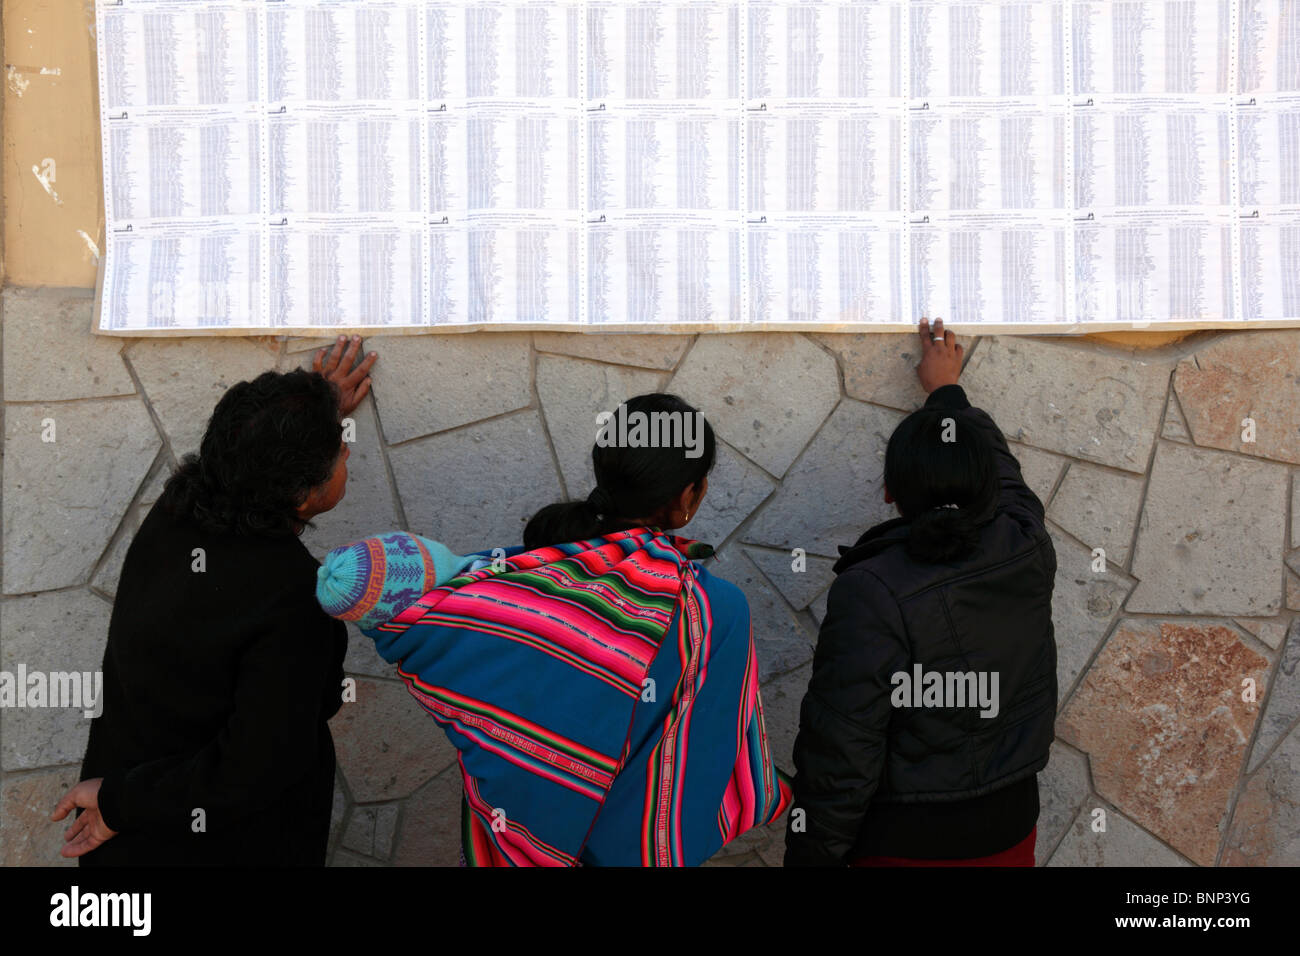 People look for their names on the electoral roll on wall outside the Town Hall in the village of Ollantaytambo, Sacred Valley, Cusco Region, Peru Stock Photo